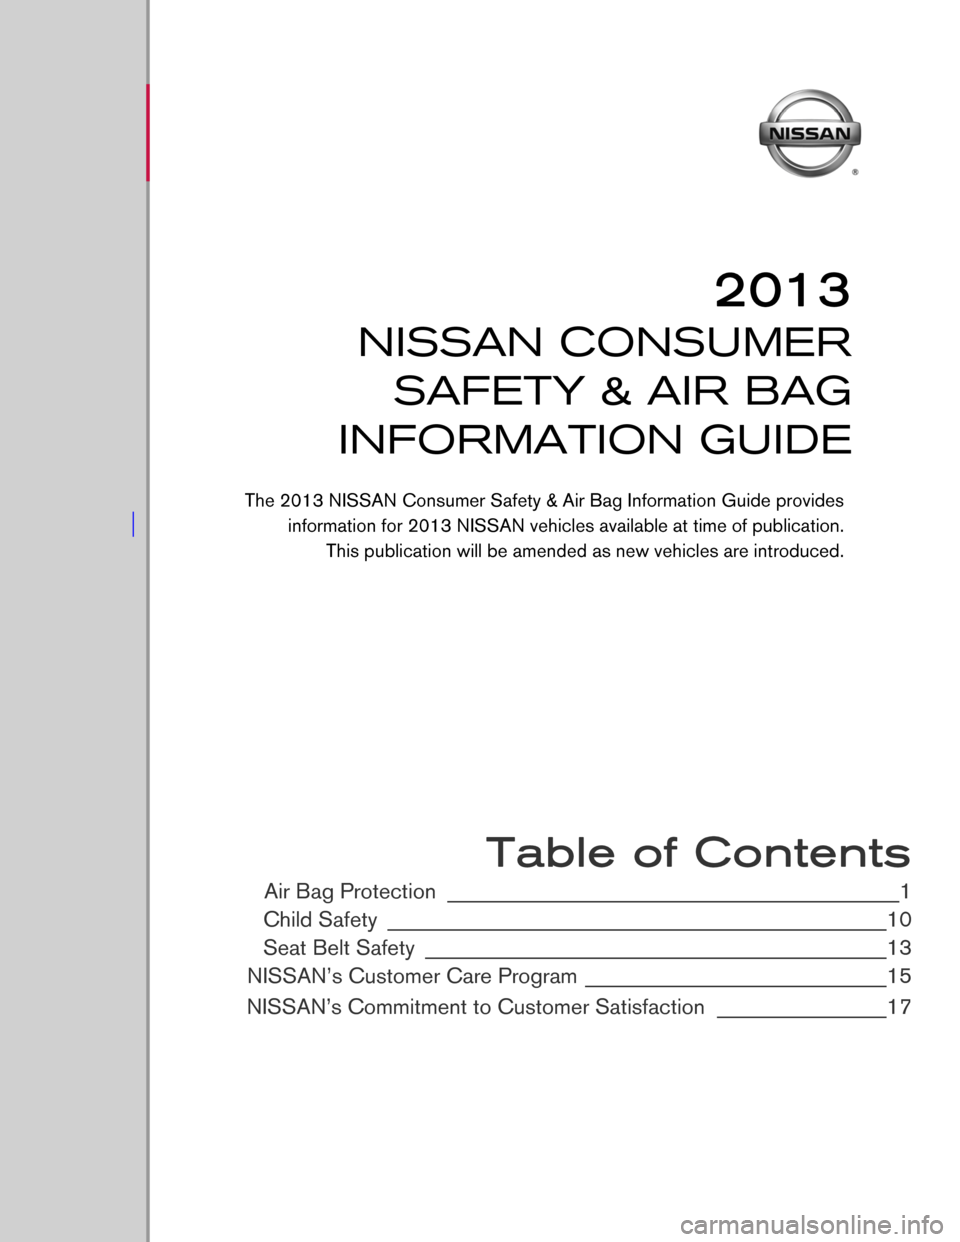 NISSAN XTERRA 2013 N50 / 2.G Consumer Safety Air Bag Information Guide  
 
 
 
 
 
 
 
 
 
 
 
 
 
 
 
 
 
 
 
 
 
 
 Table of Contents
Air Bag Protection ________________________________________________1
Child Safety
 ____________________________________________________